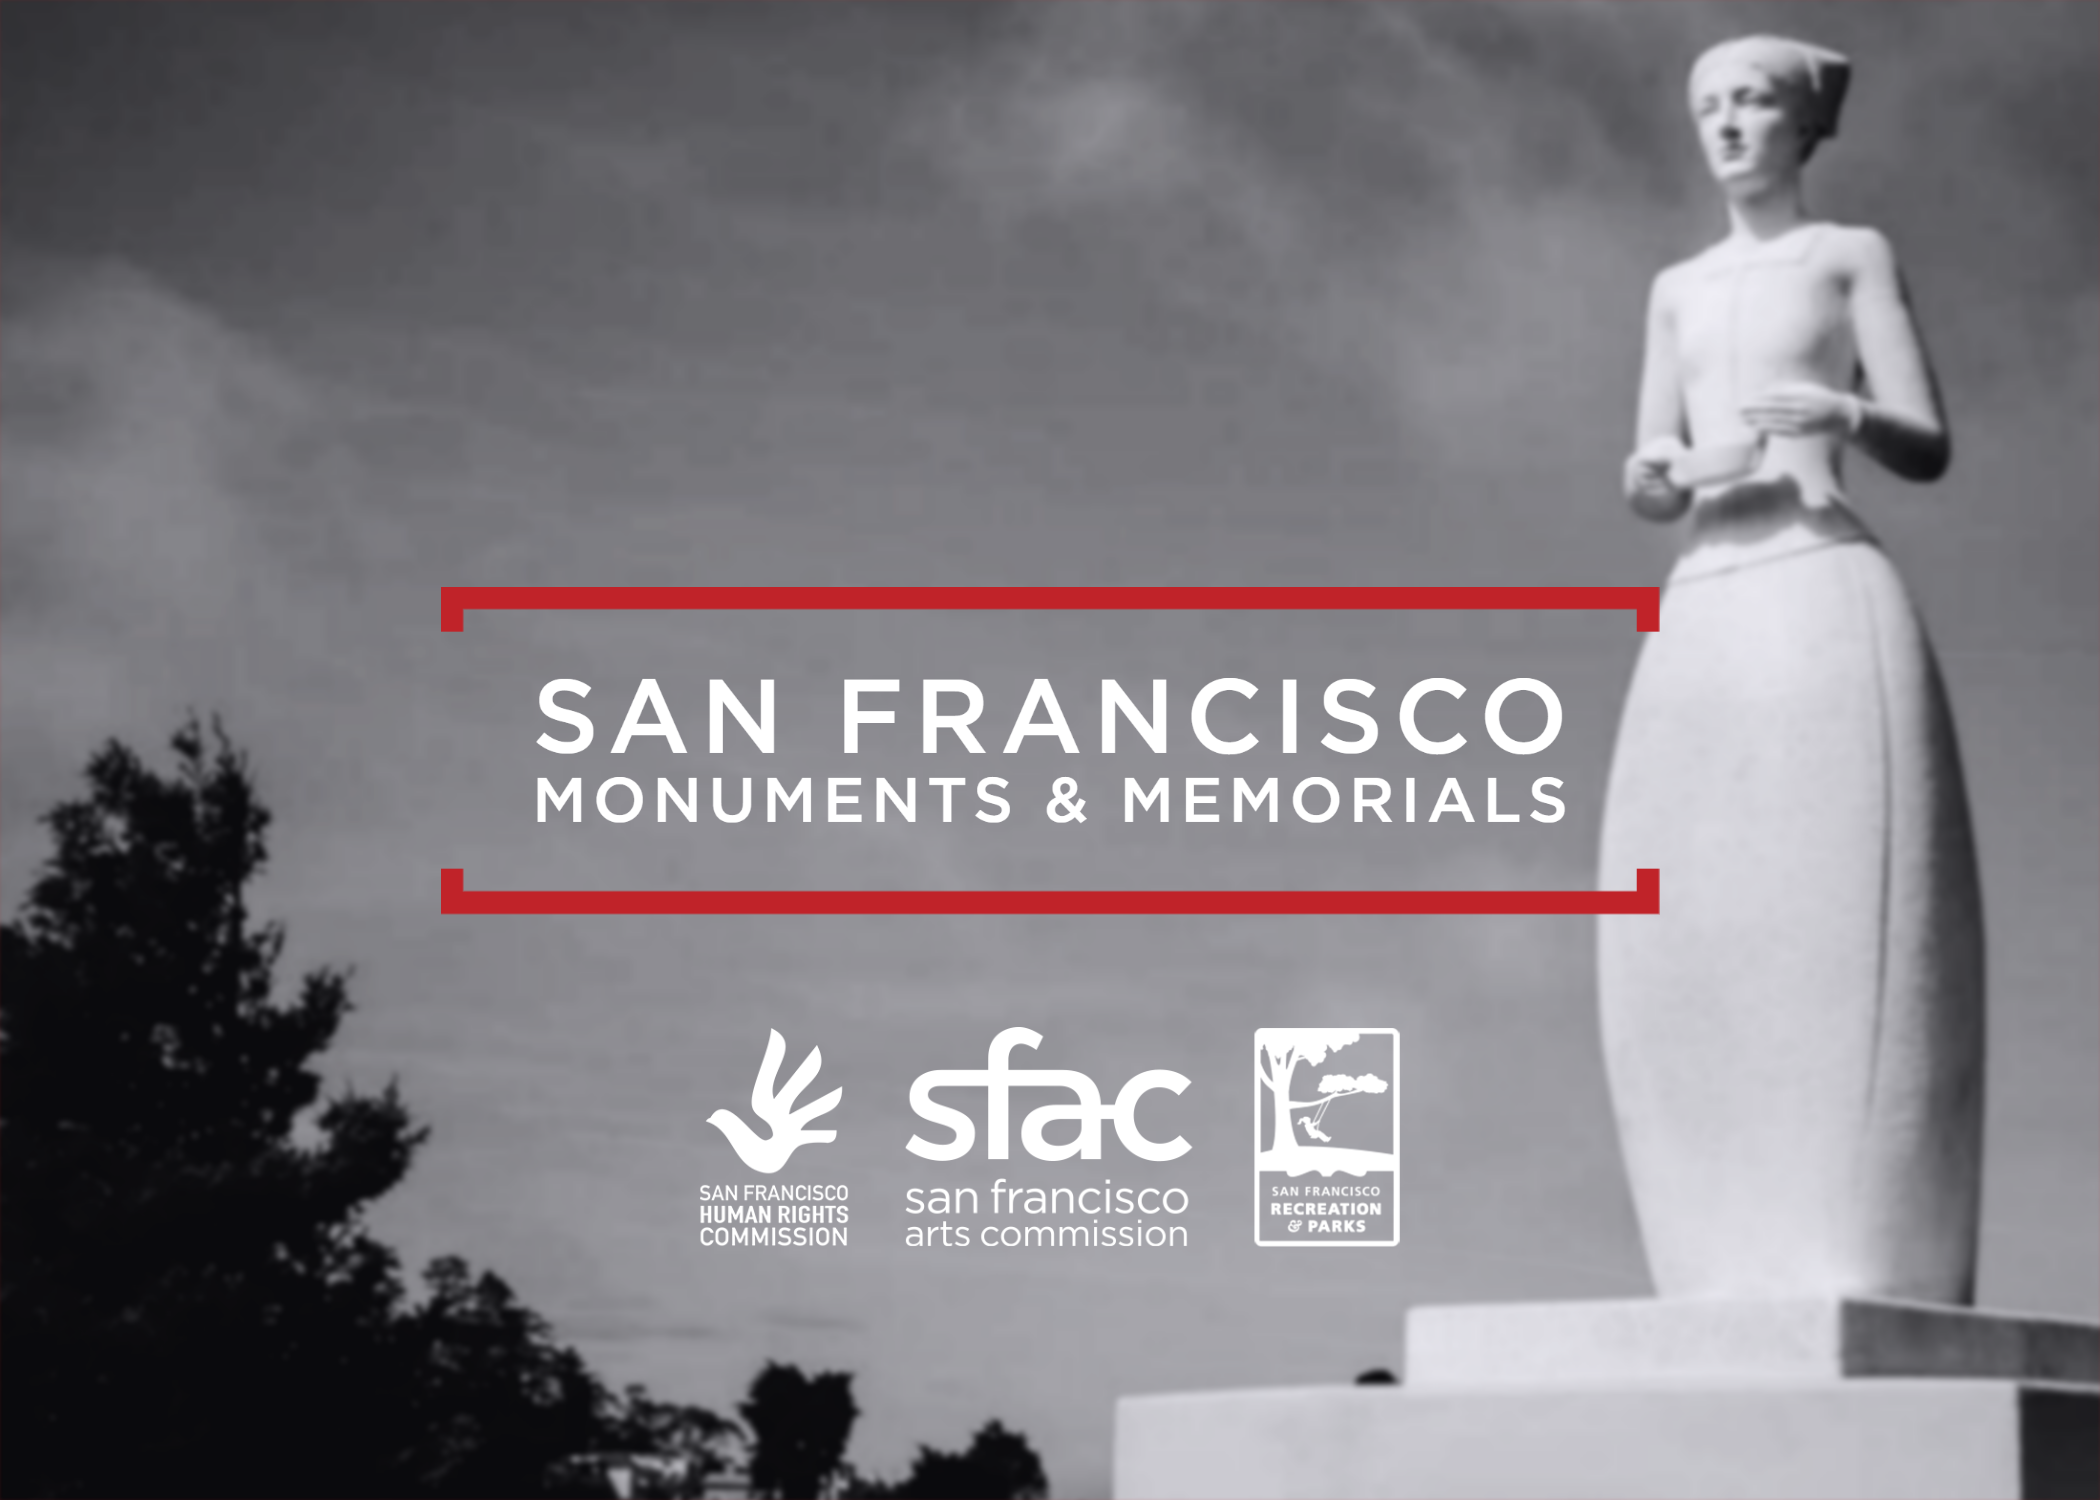 Black and white poster with text "San Francisco's Monuments and Memorials" and agency logos